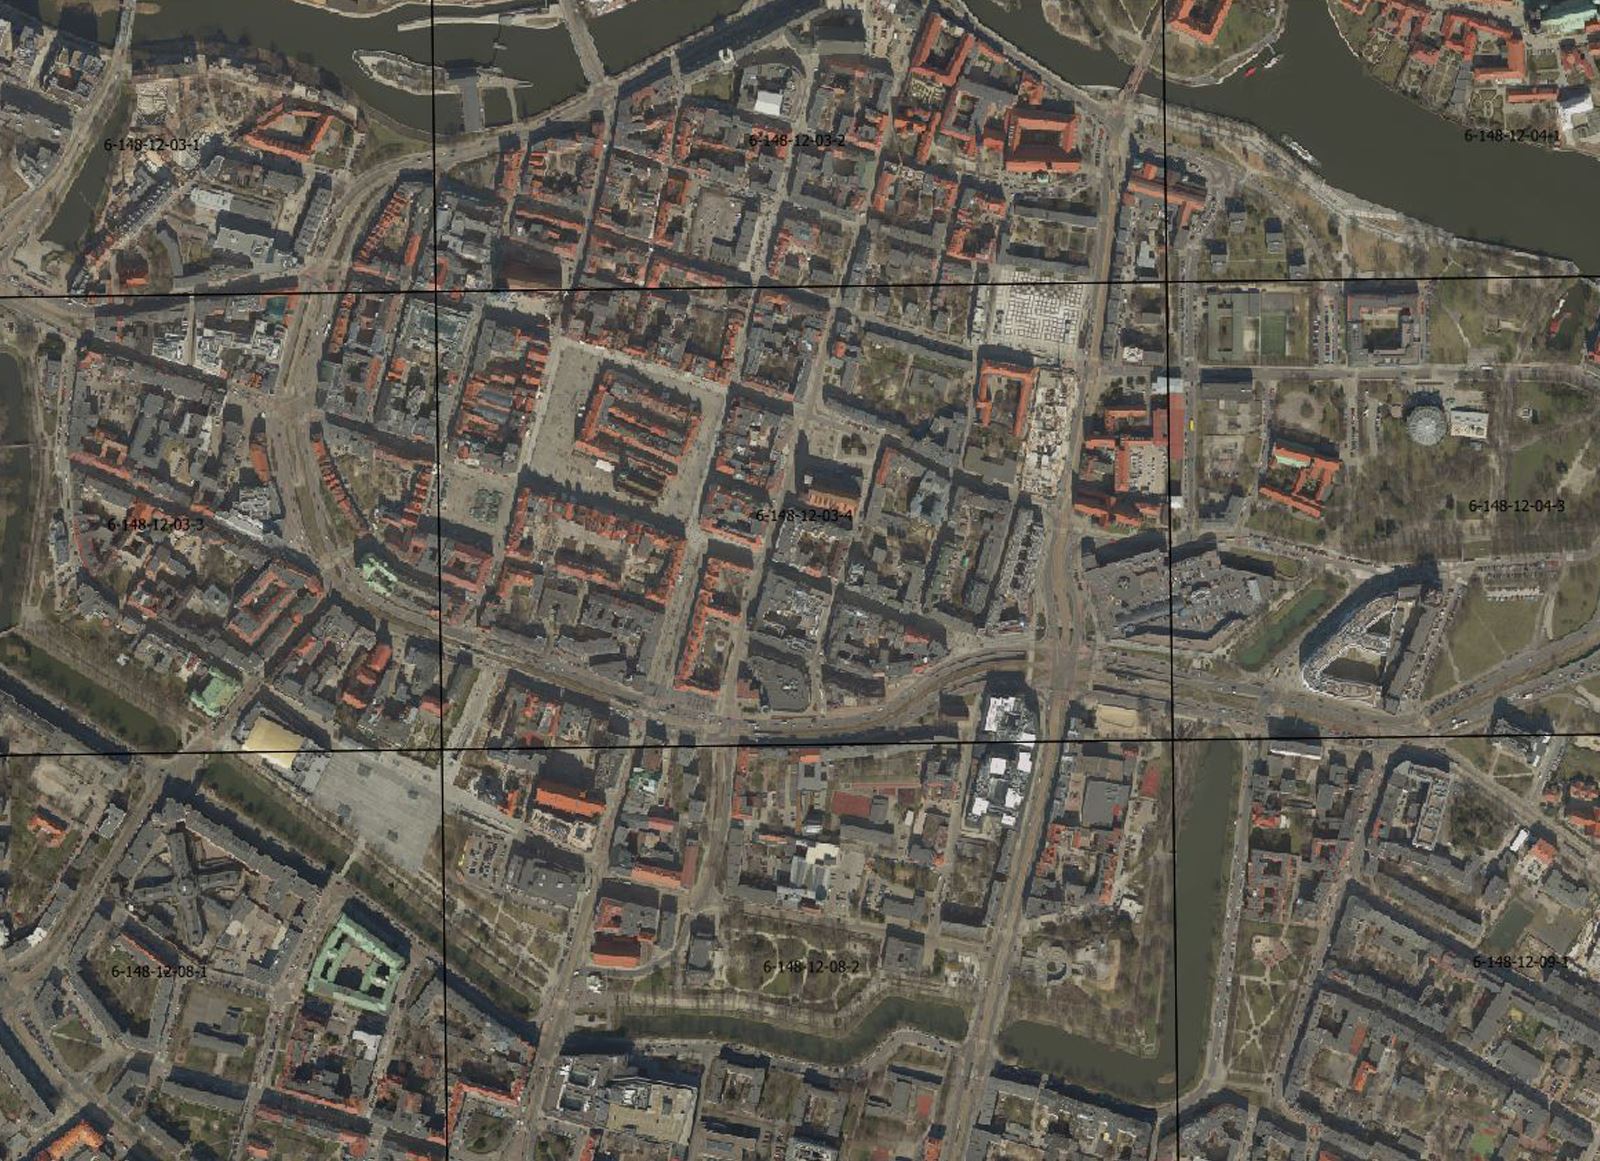 Preparation of an orthophoto map for Wrocław